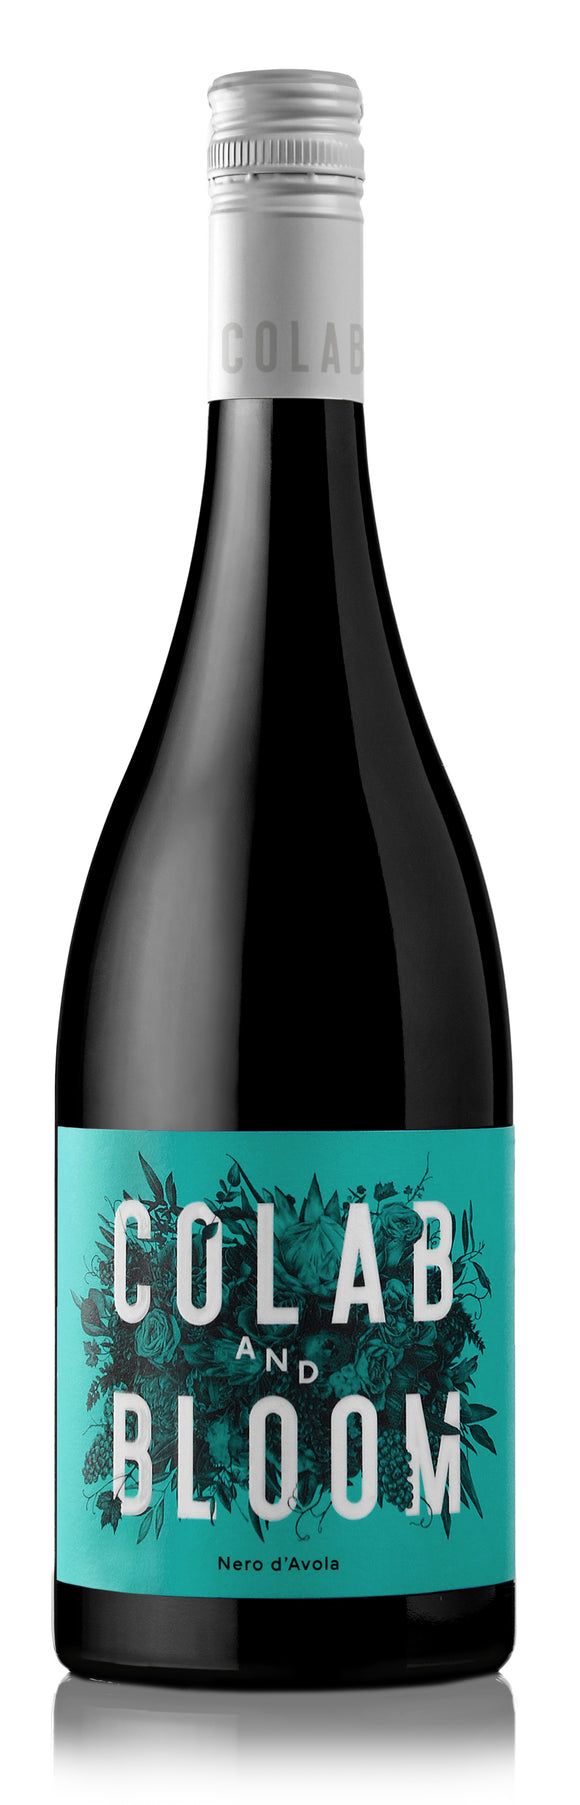 Colab and Bloom Nero D'avola 750mL 6 Pack